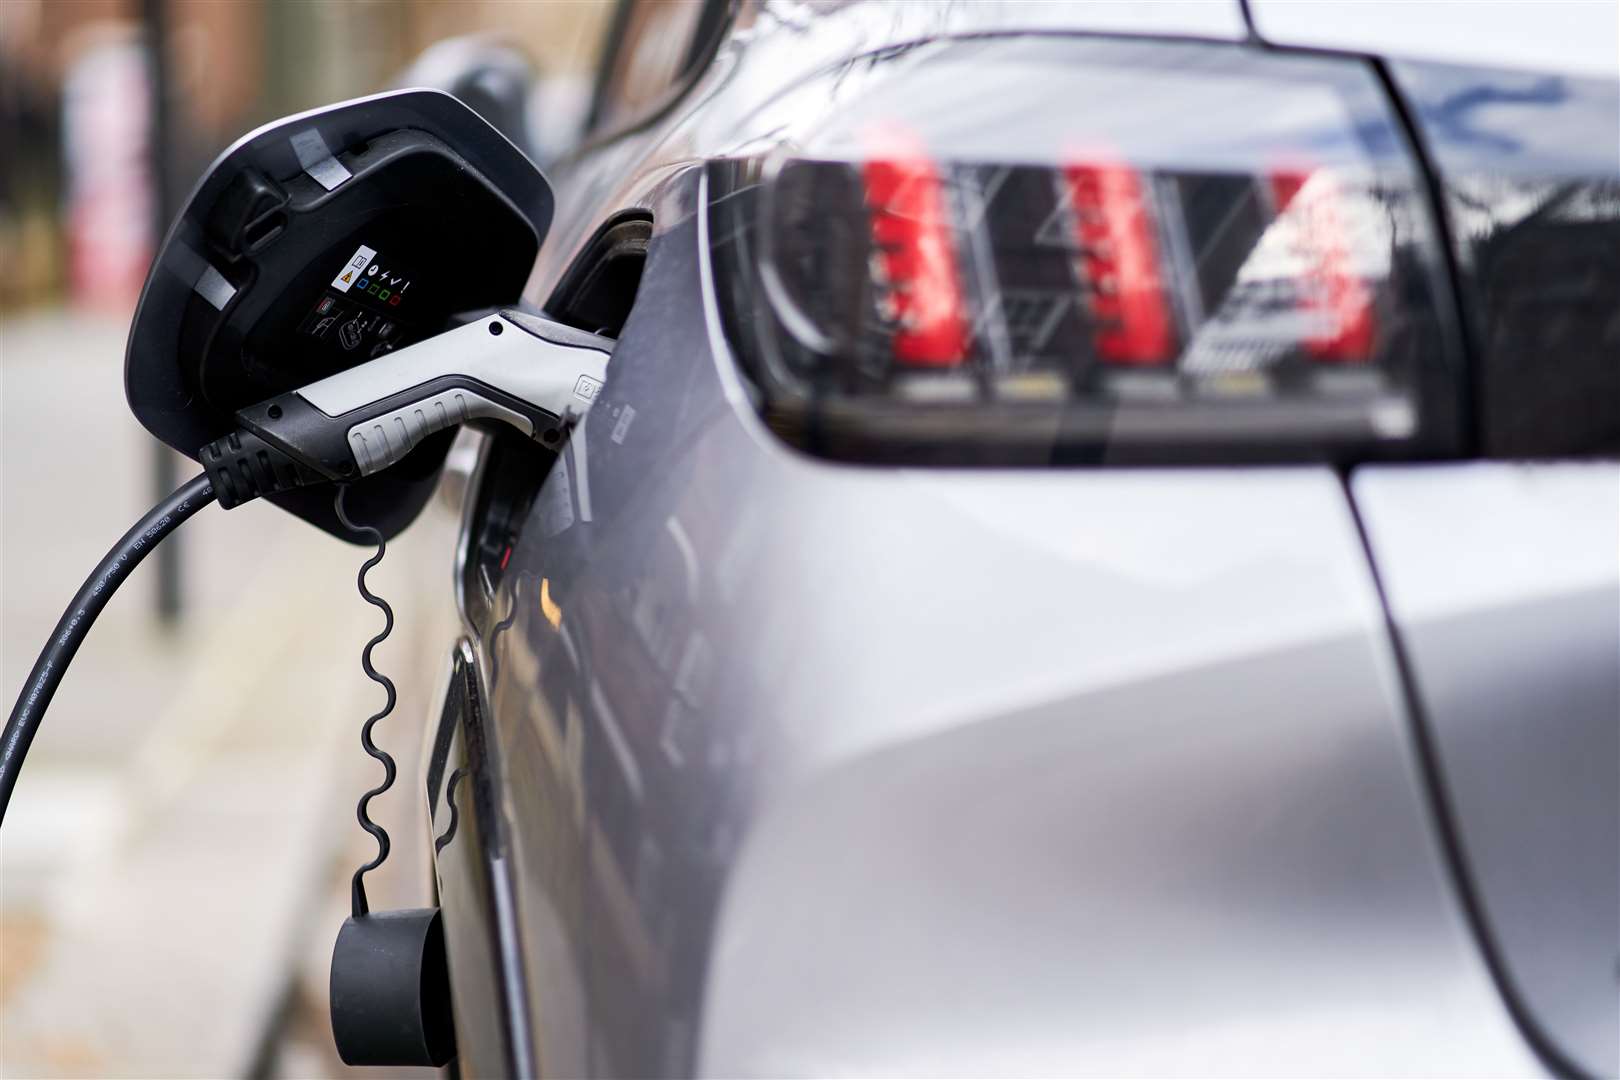 Scottish Tory analysis suggests the Scottish Government will miss its electric car charging station target (John Walton/PA)